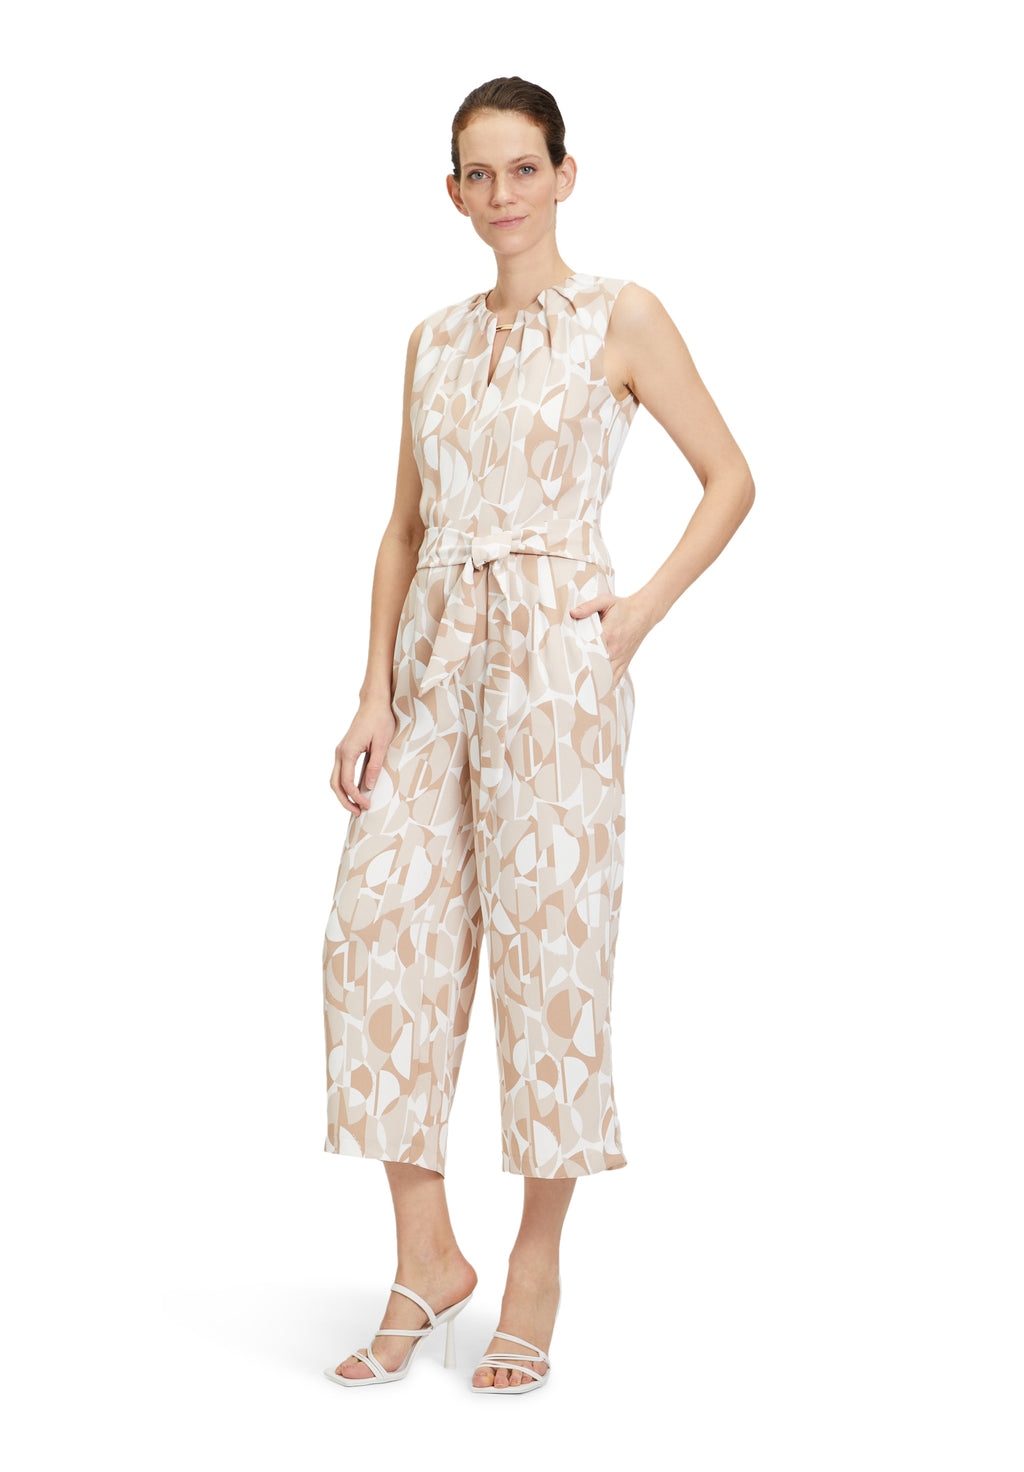 Betty & Co geometric print jumpsuit with wide culotte style legs and tie waist in beige and white

Product code 6460/3345